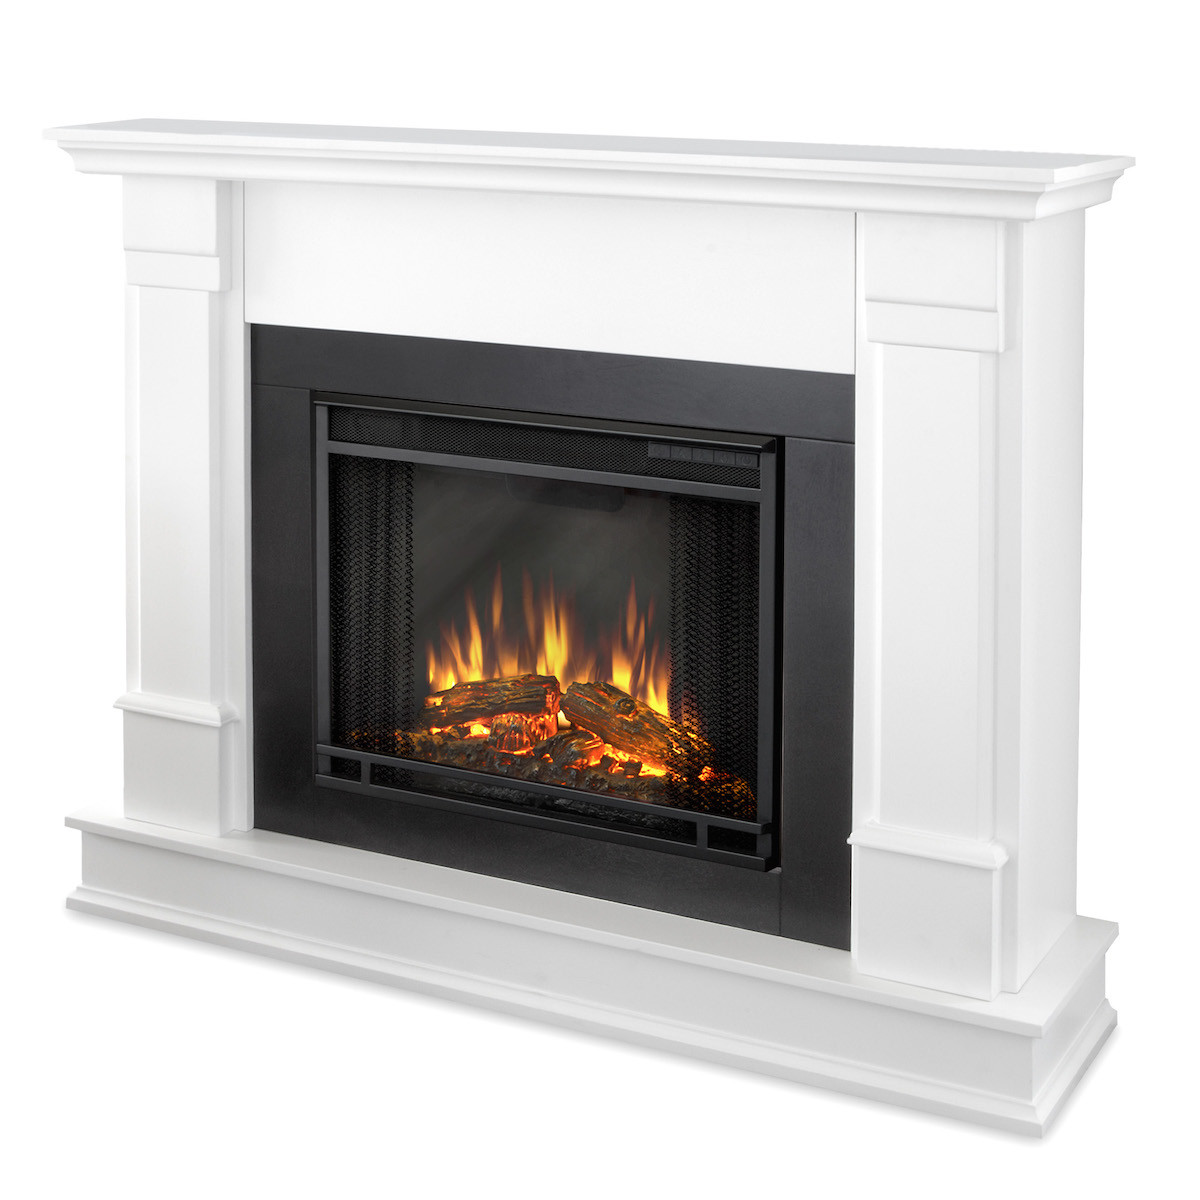 Real Flame White Electric Fireplace
 Real Flame Silverton Electric Fireplace in White